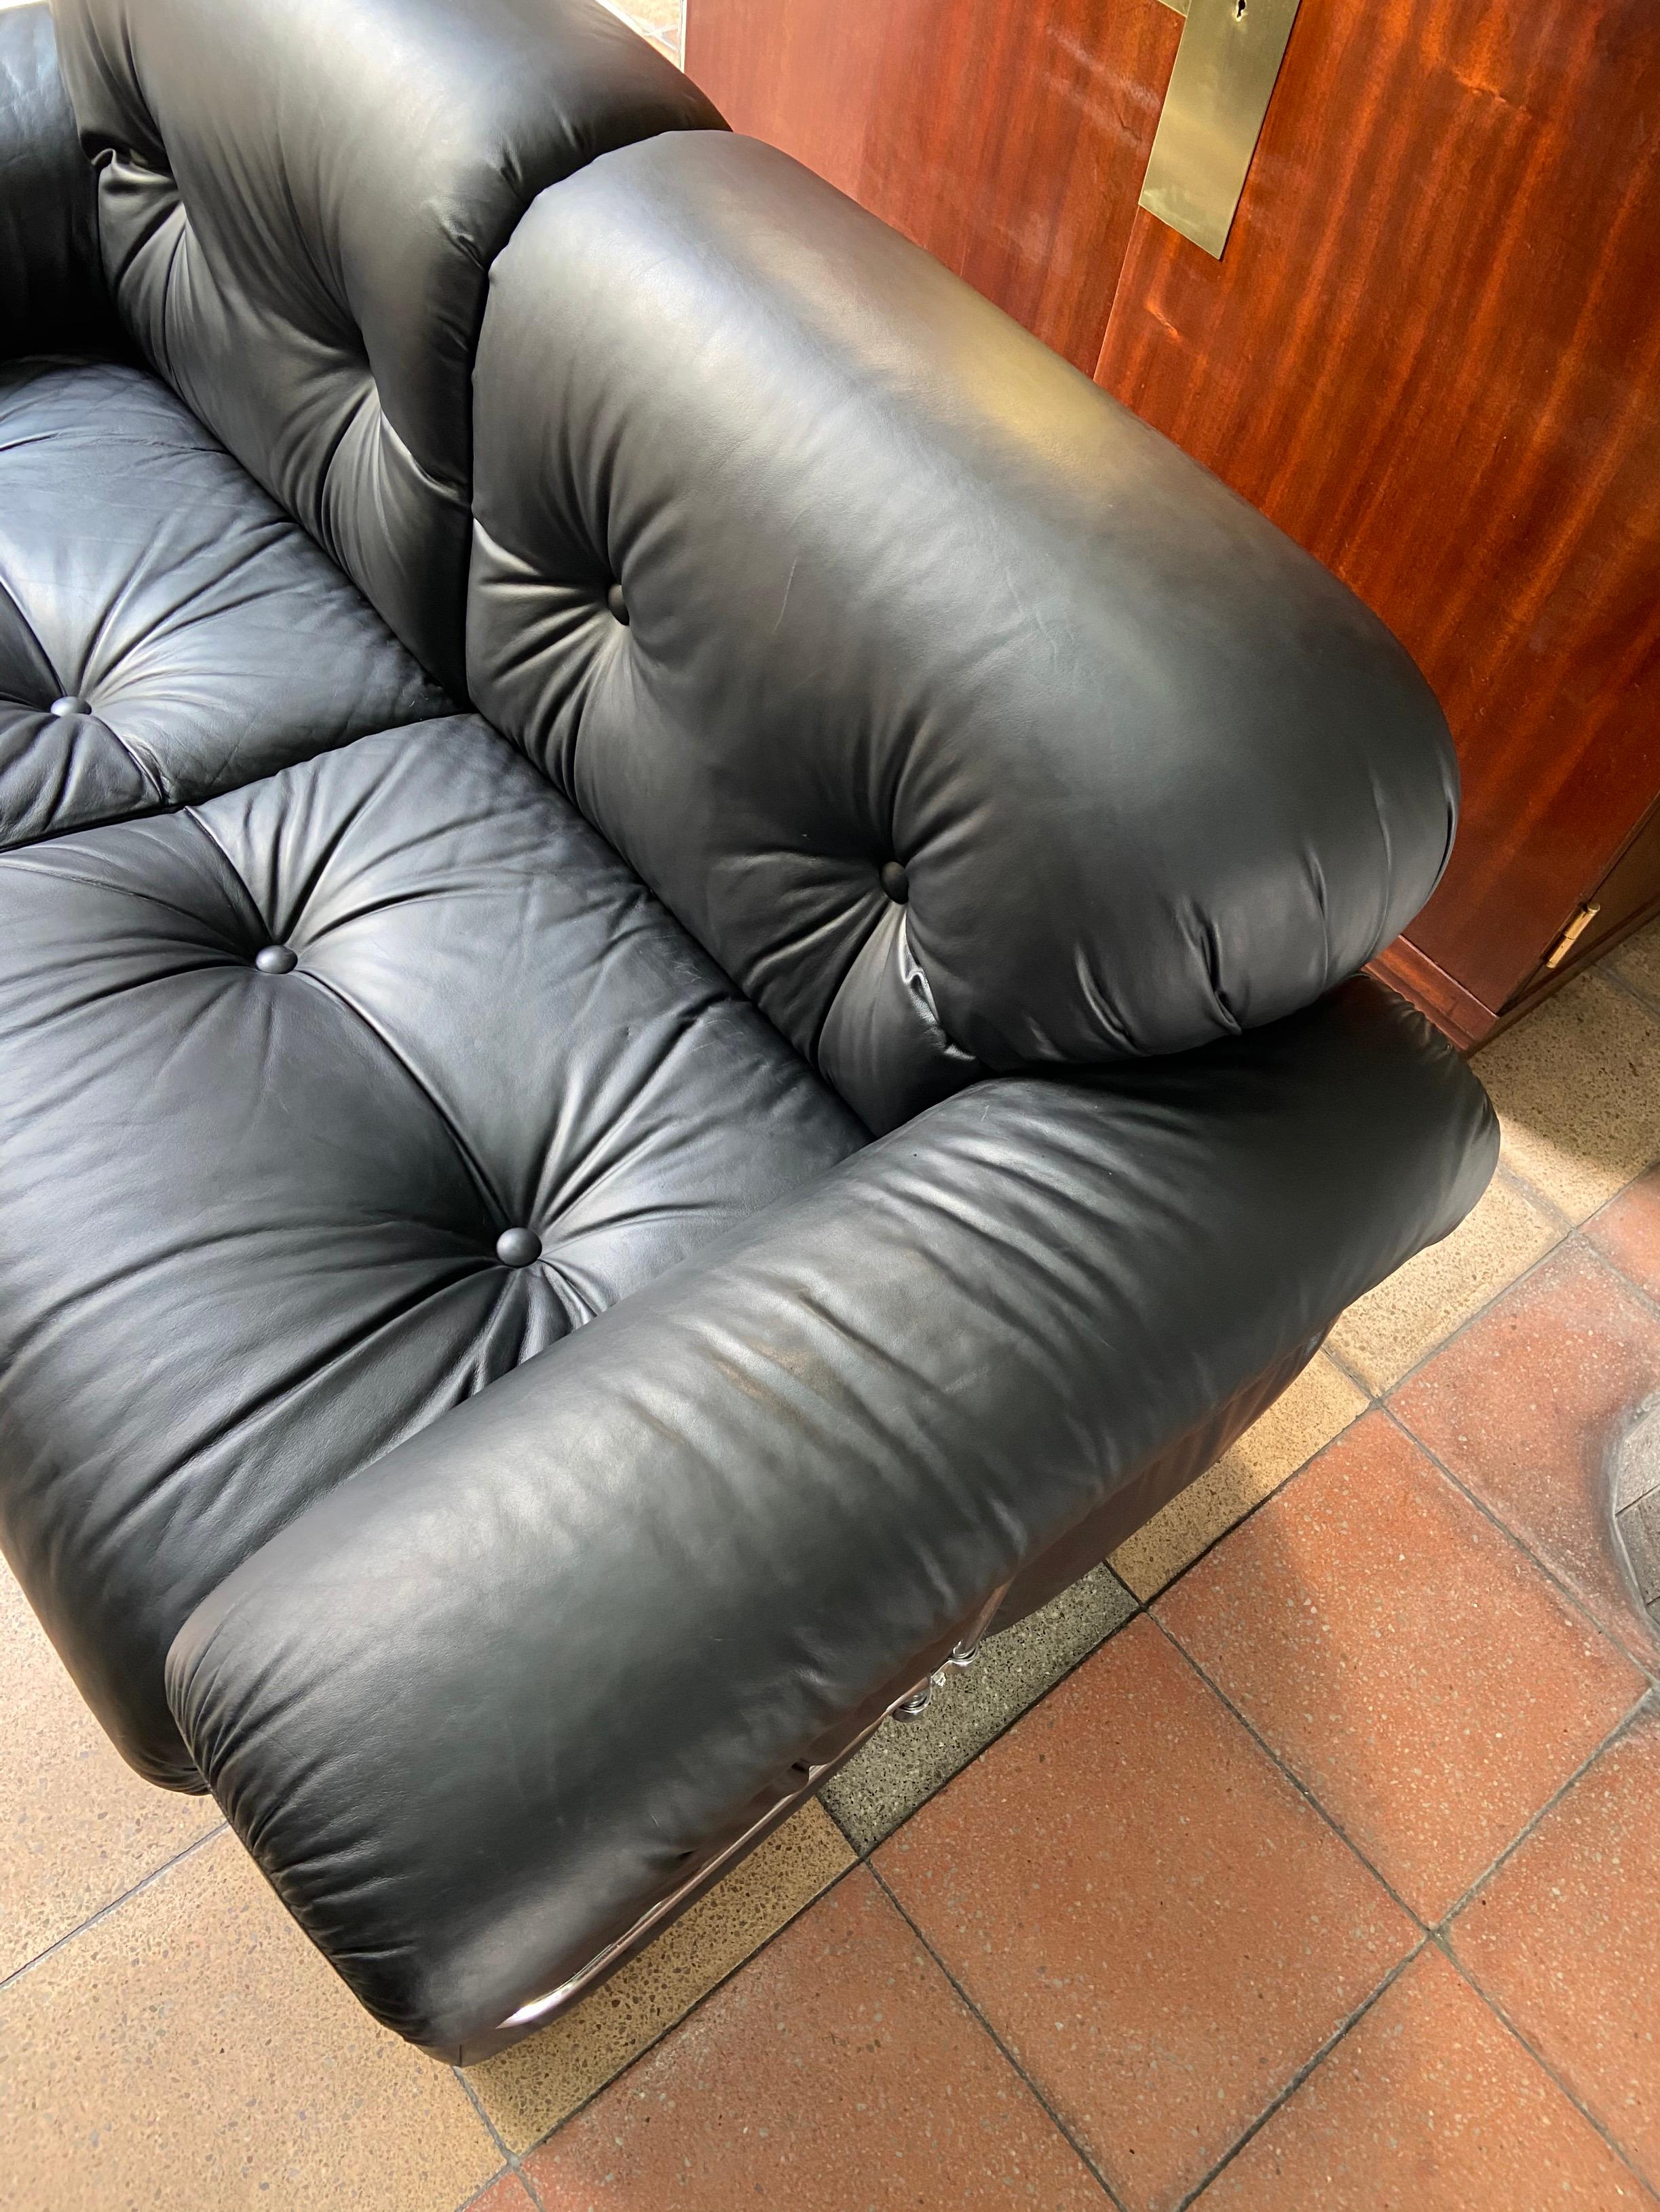 Late 20th Century Adriano Piazzesi, Black Leather 2-Seat Sofa, 1976